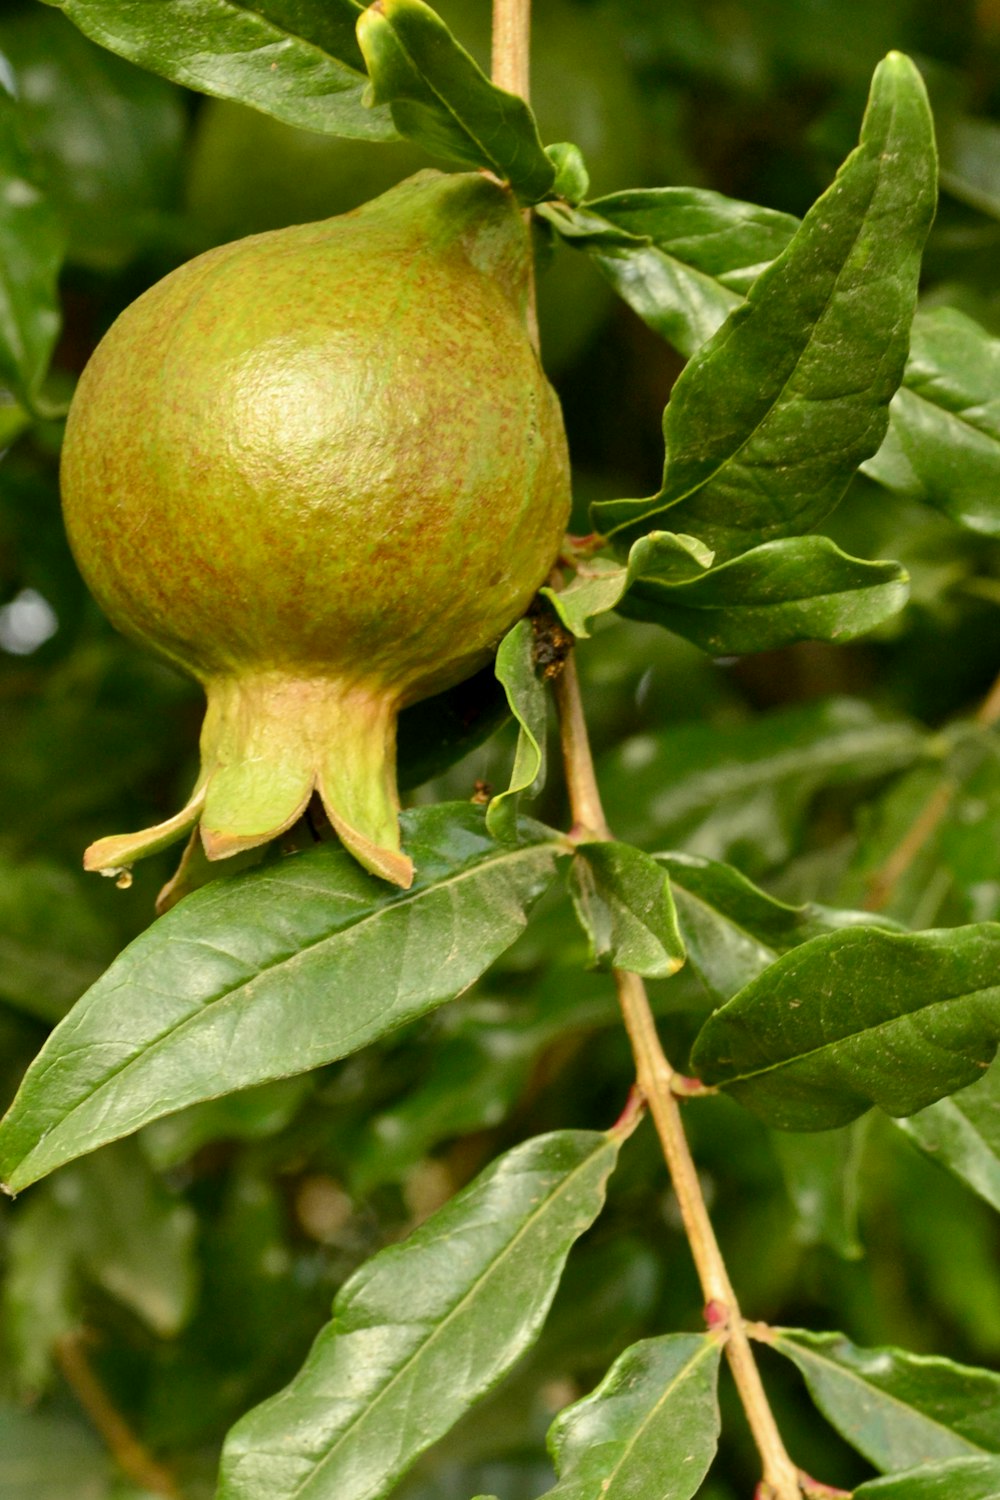 a close up of a fruit on a tree branch